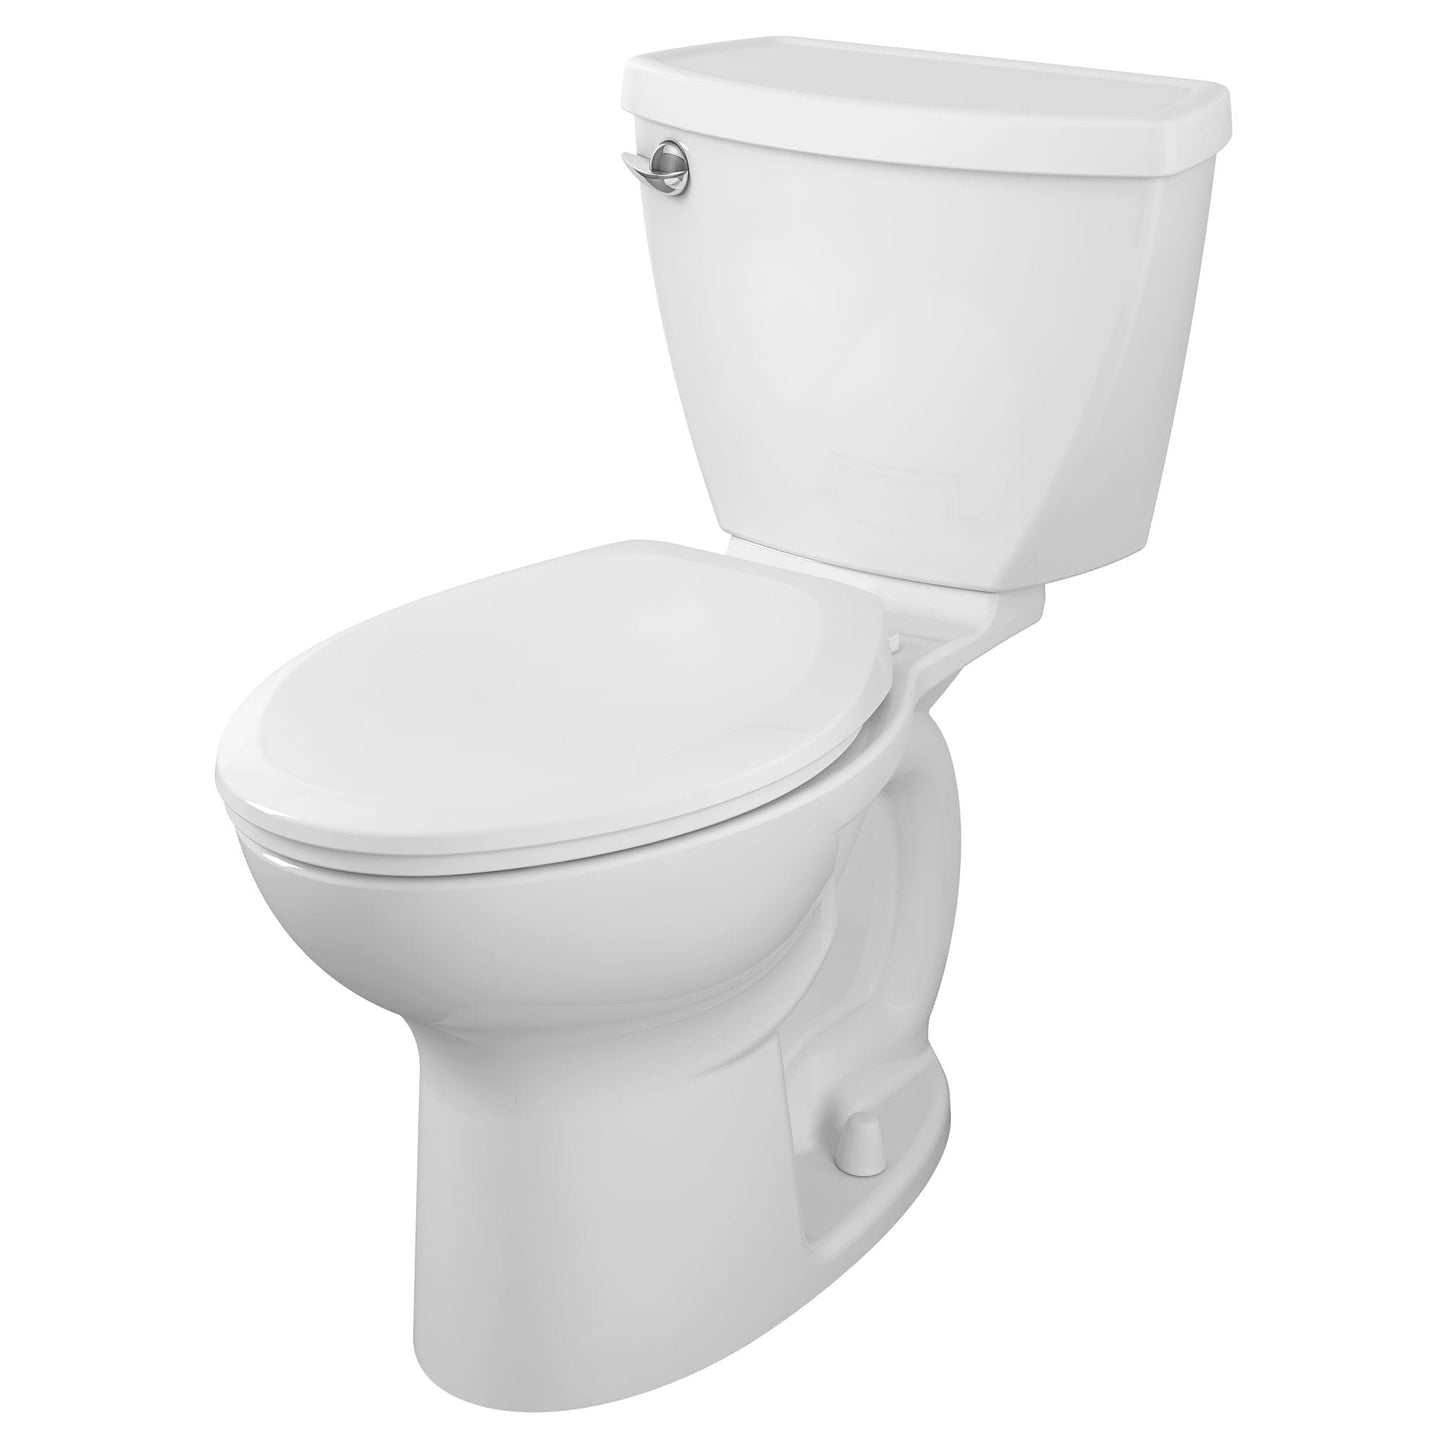 5321A65CT.020 - Slow-Close Elongated Toilet Seat - White